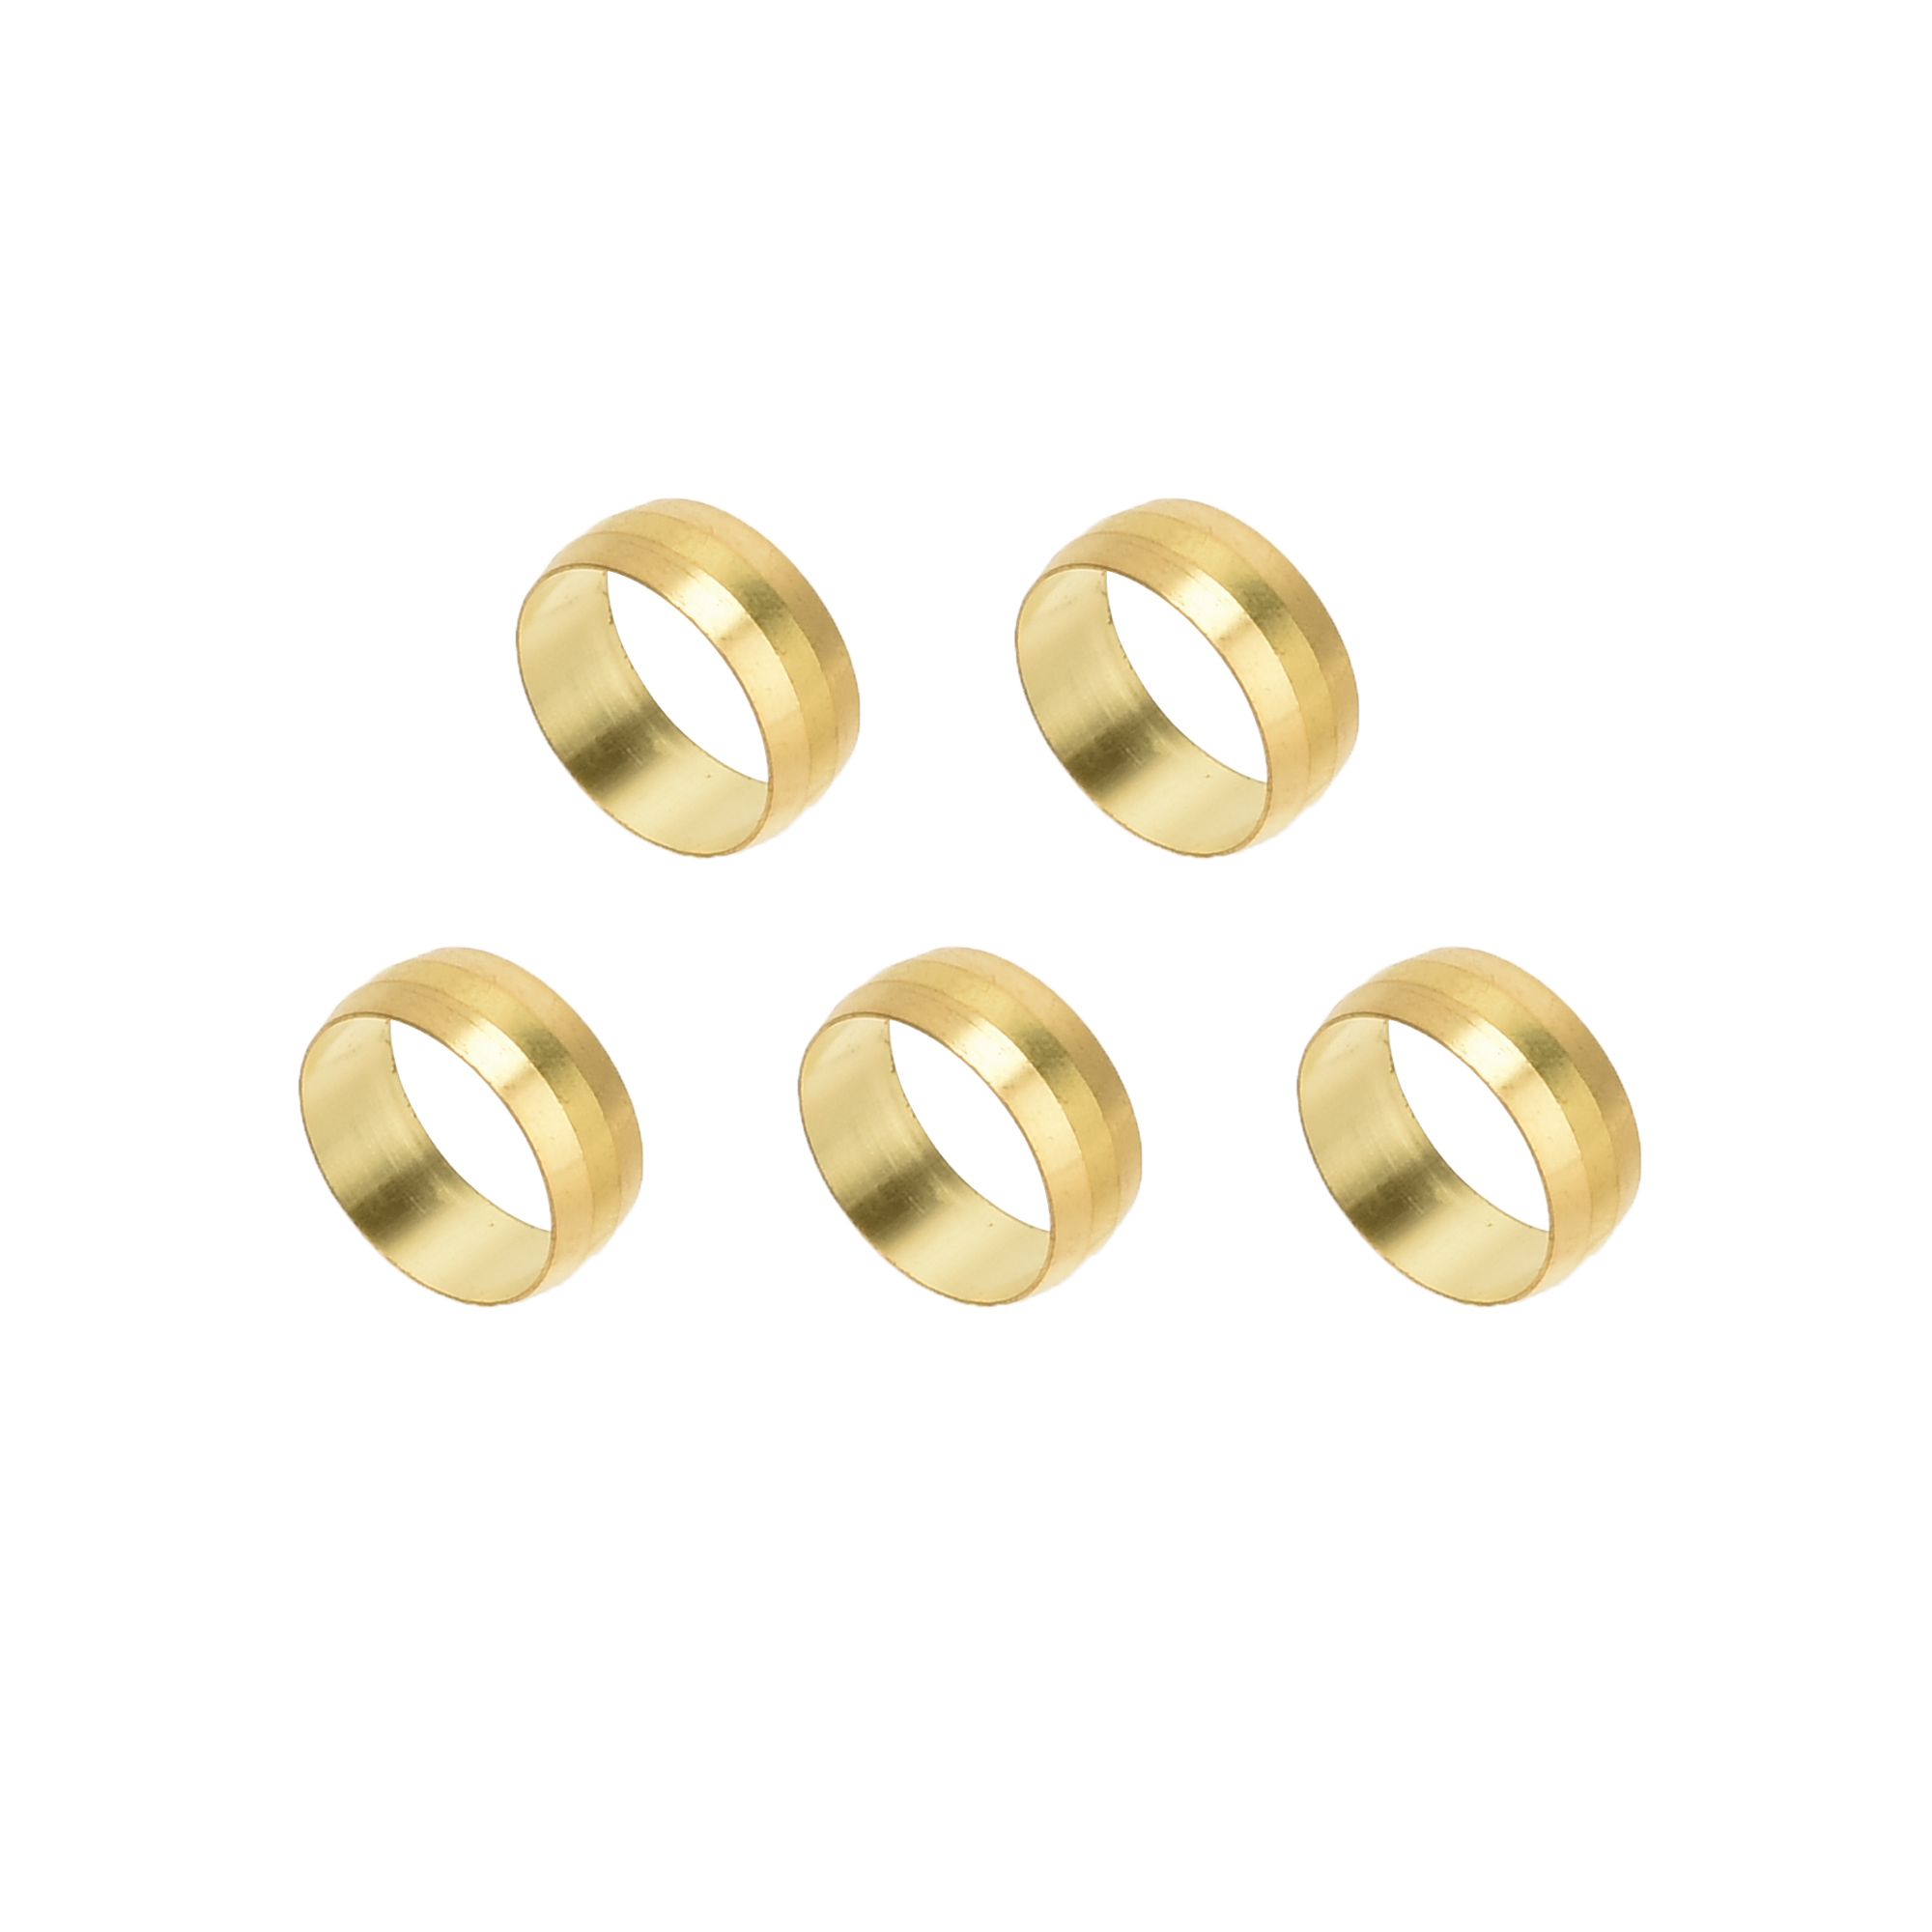 CB 8MM BRASS OLIVE (PACK OF 5)